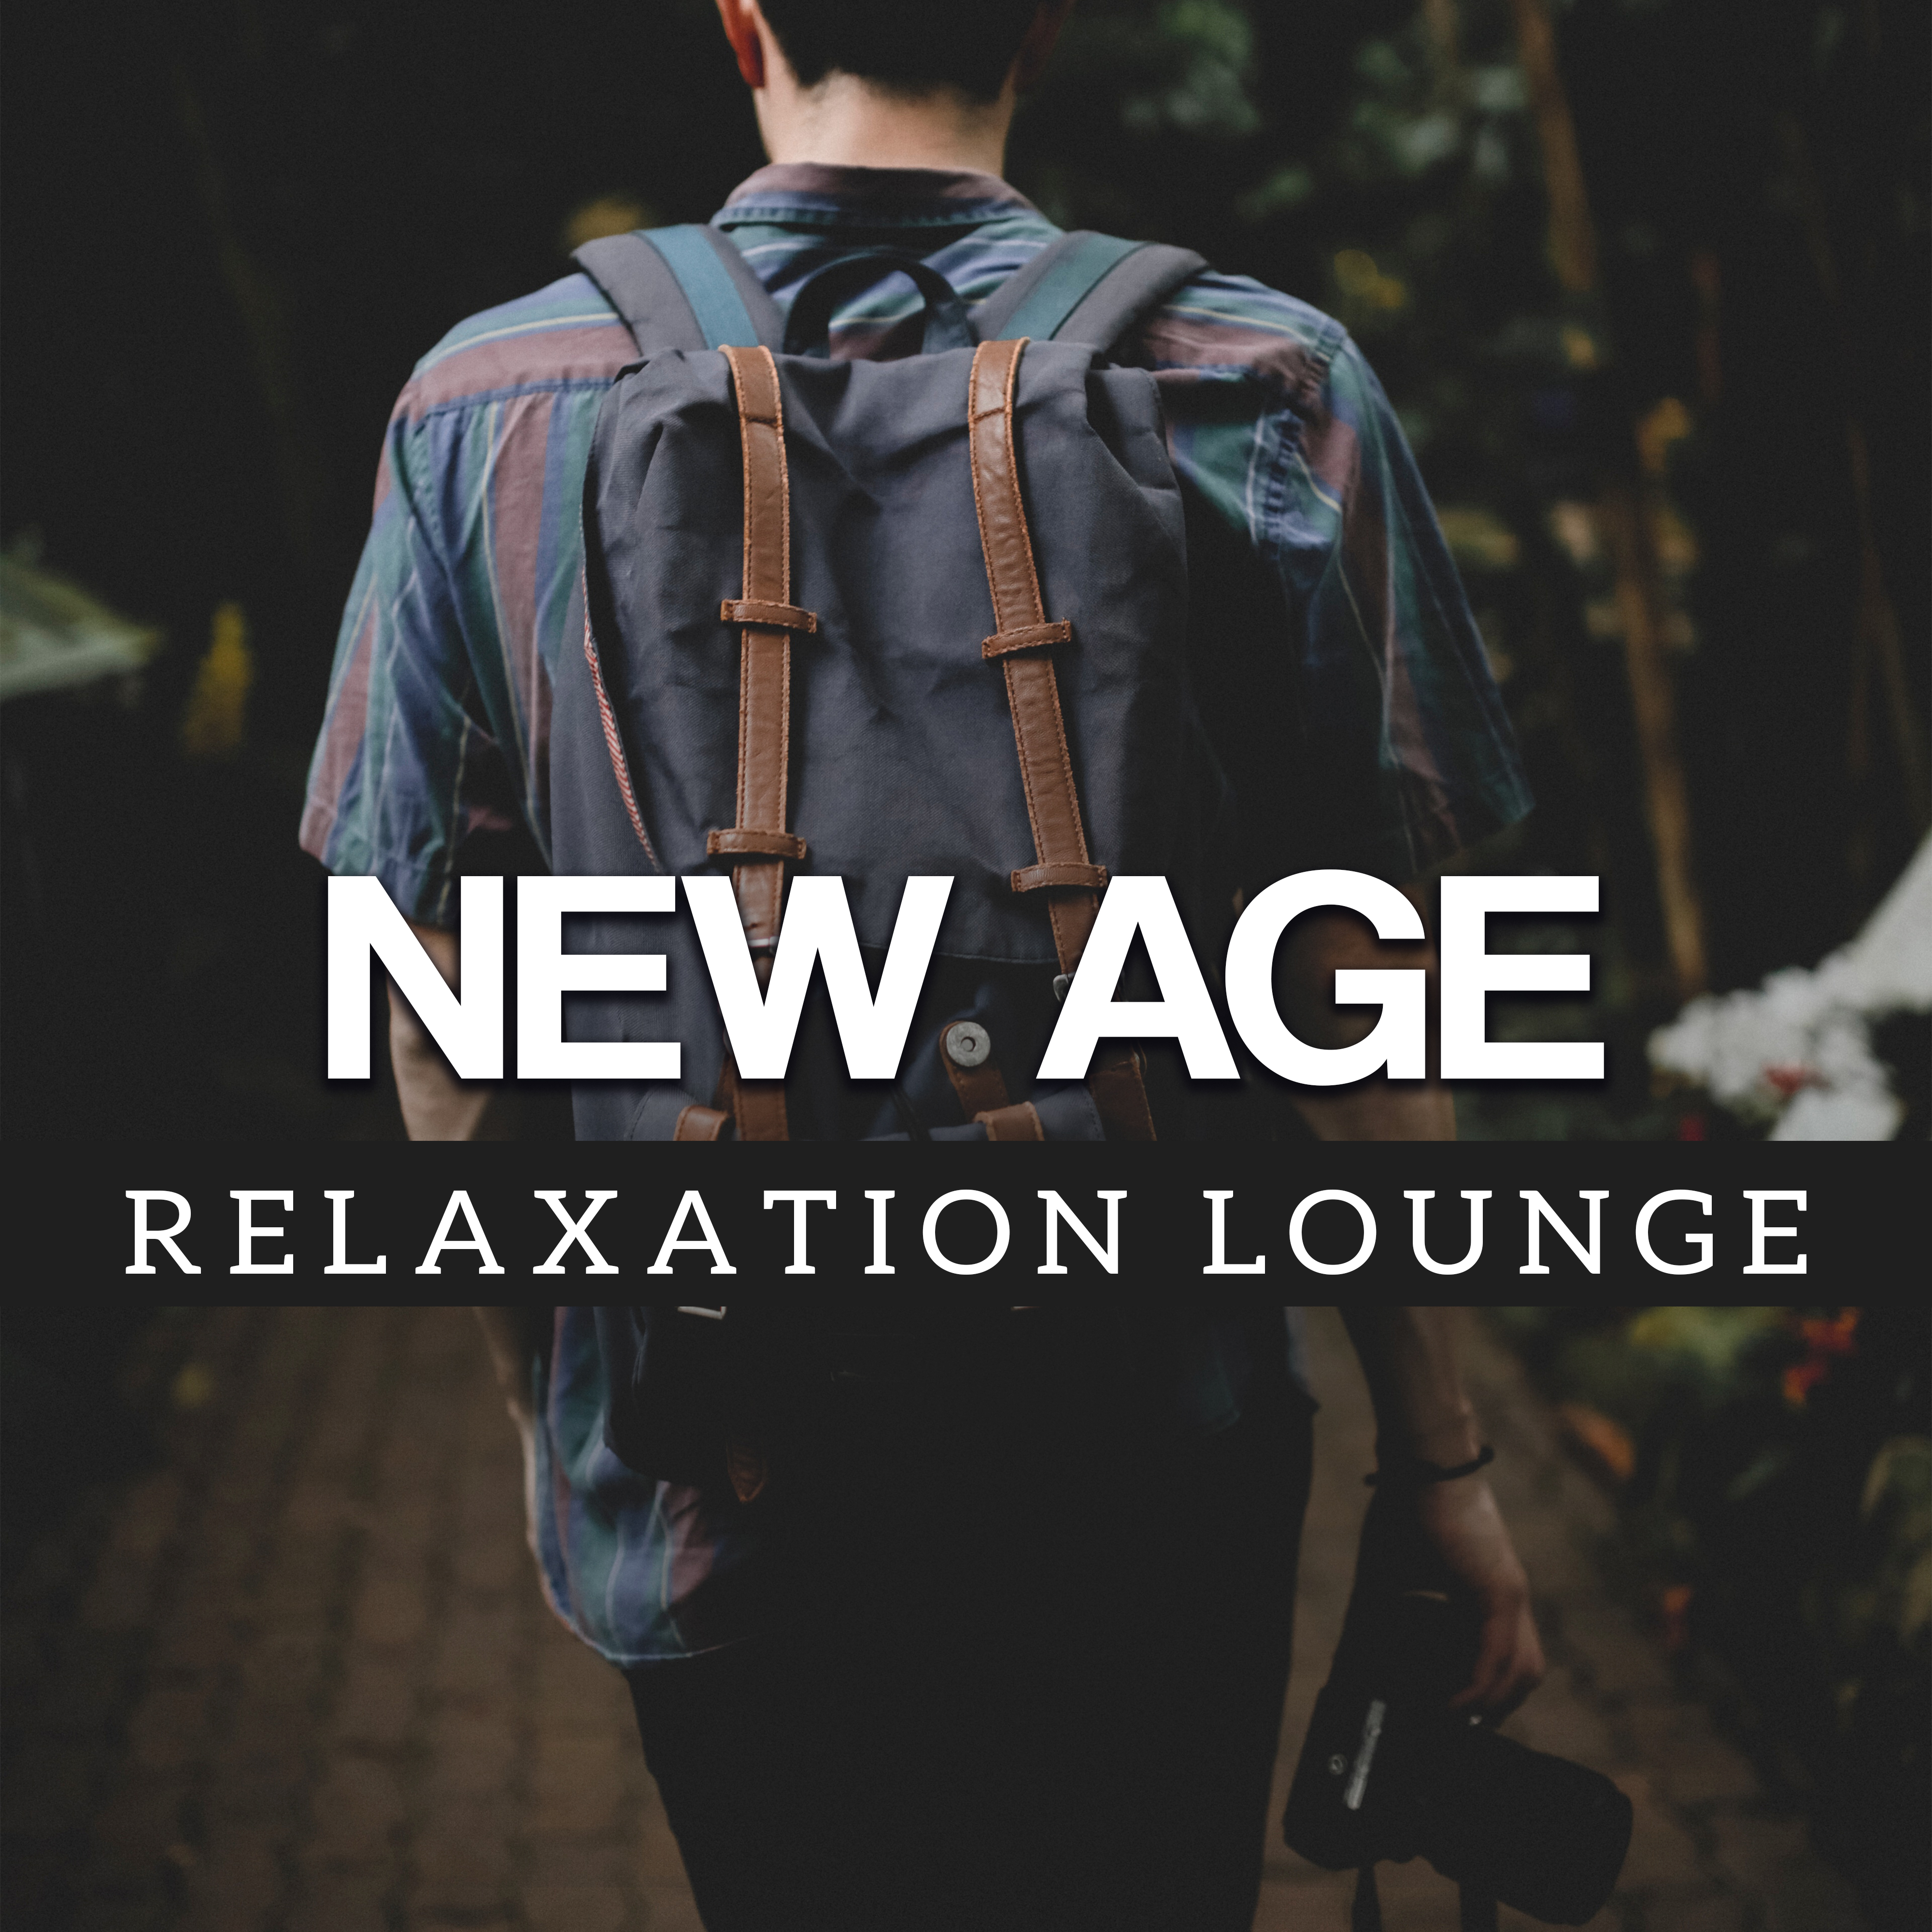 New Age Relaxation Lounge